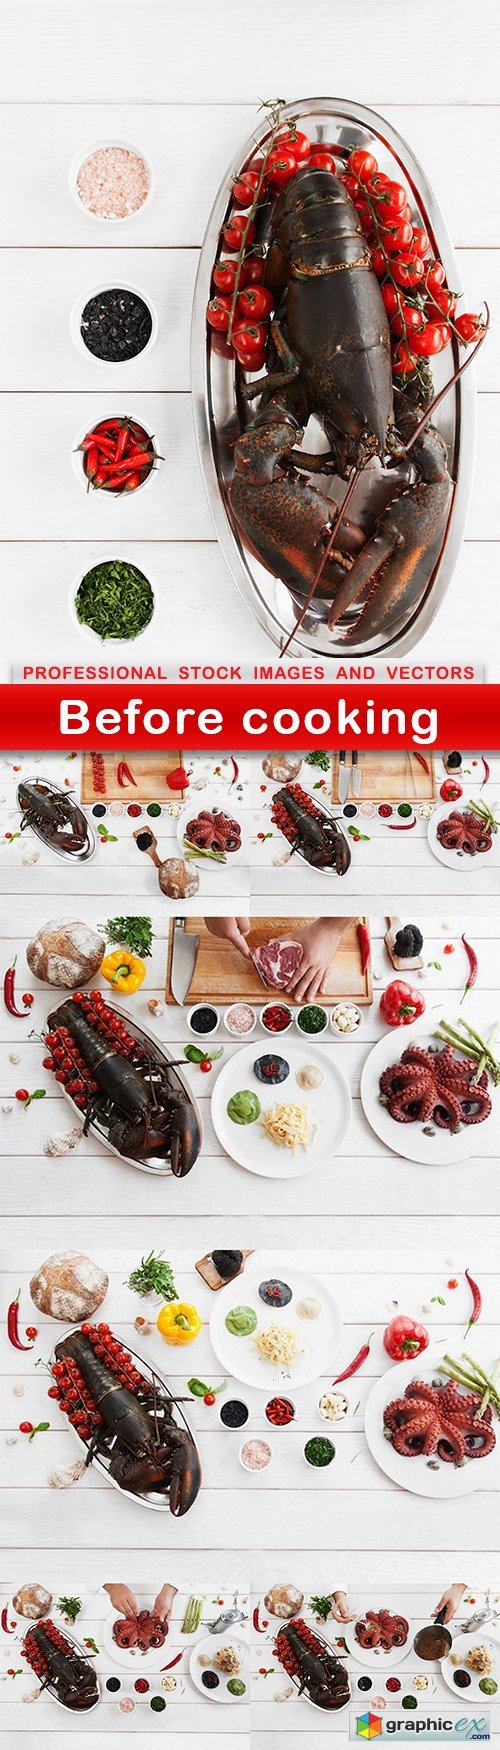 Before cooking - 7 UHQ JPEG